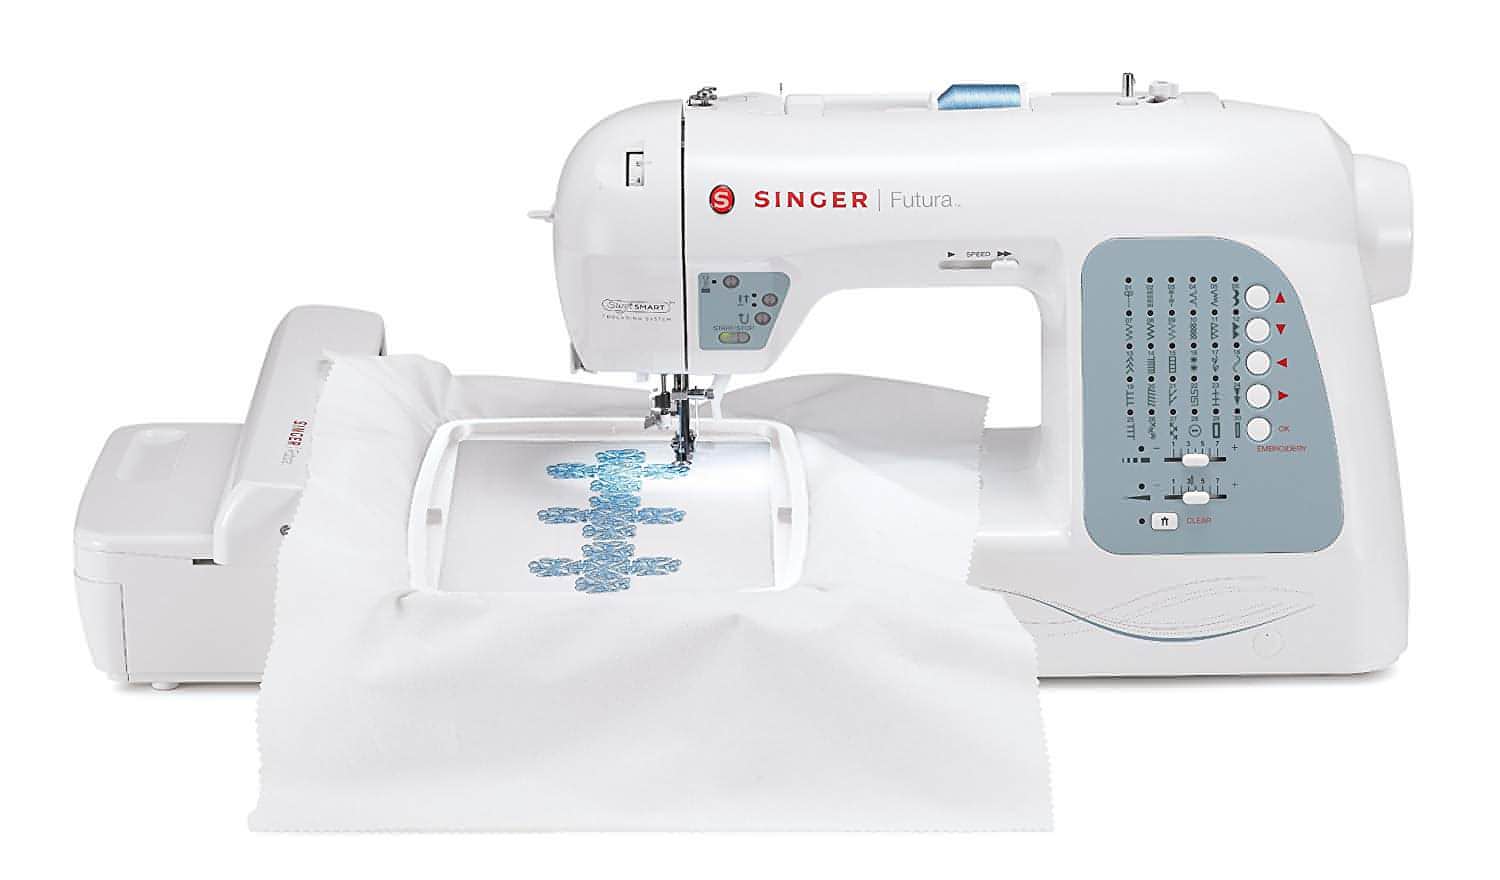 Singer Futura XL400 - Sewing & Embroidery Machine